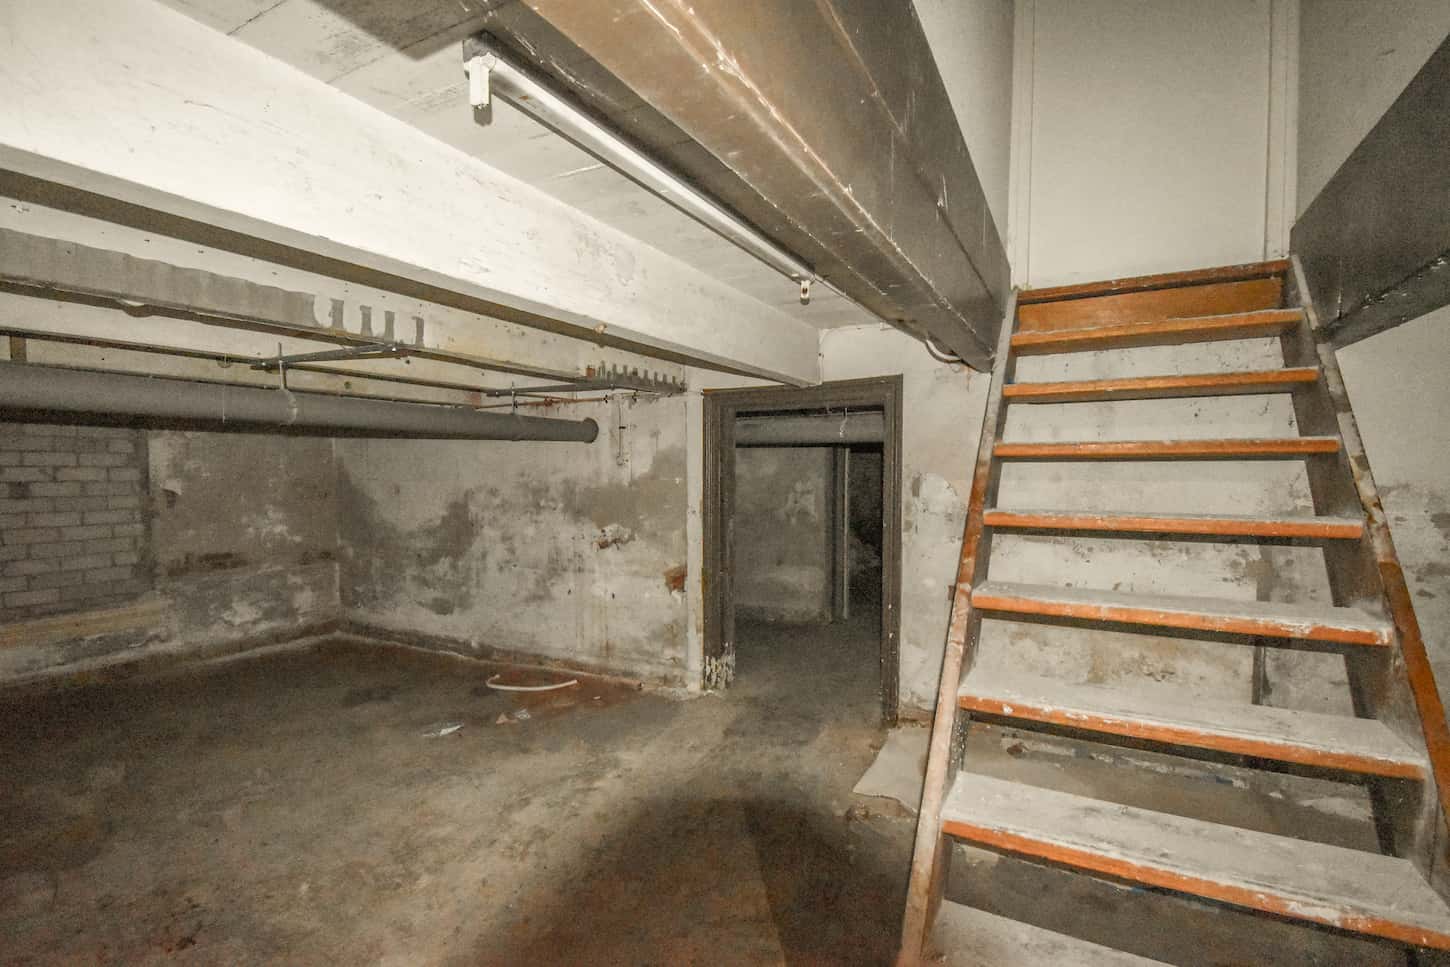 An image of a basement room in an apartment.